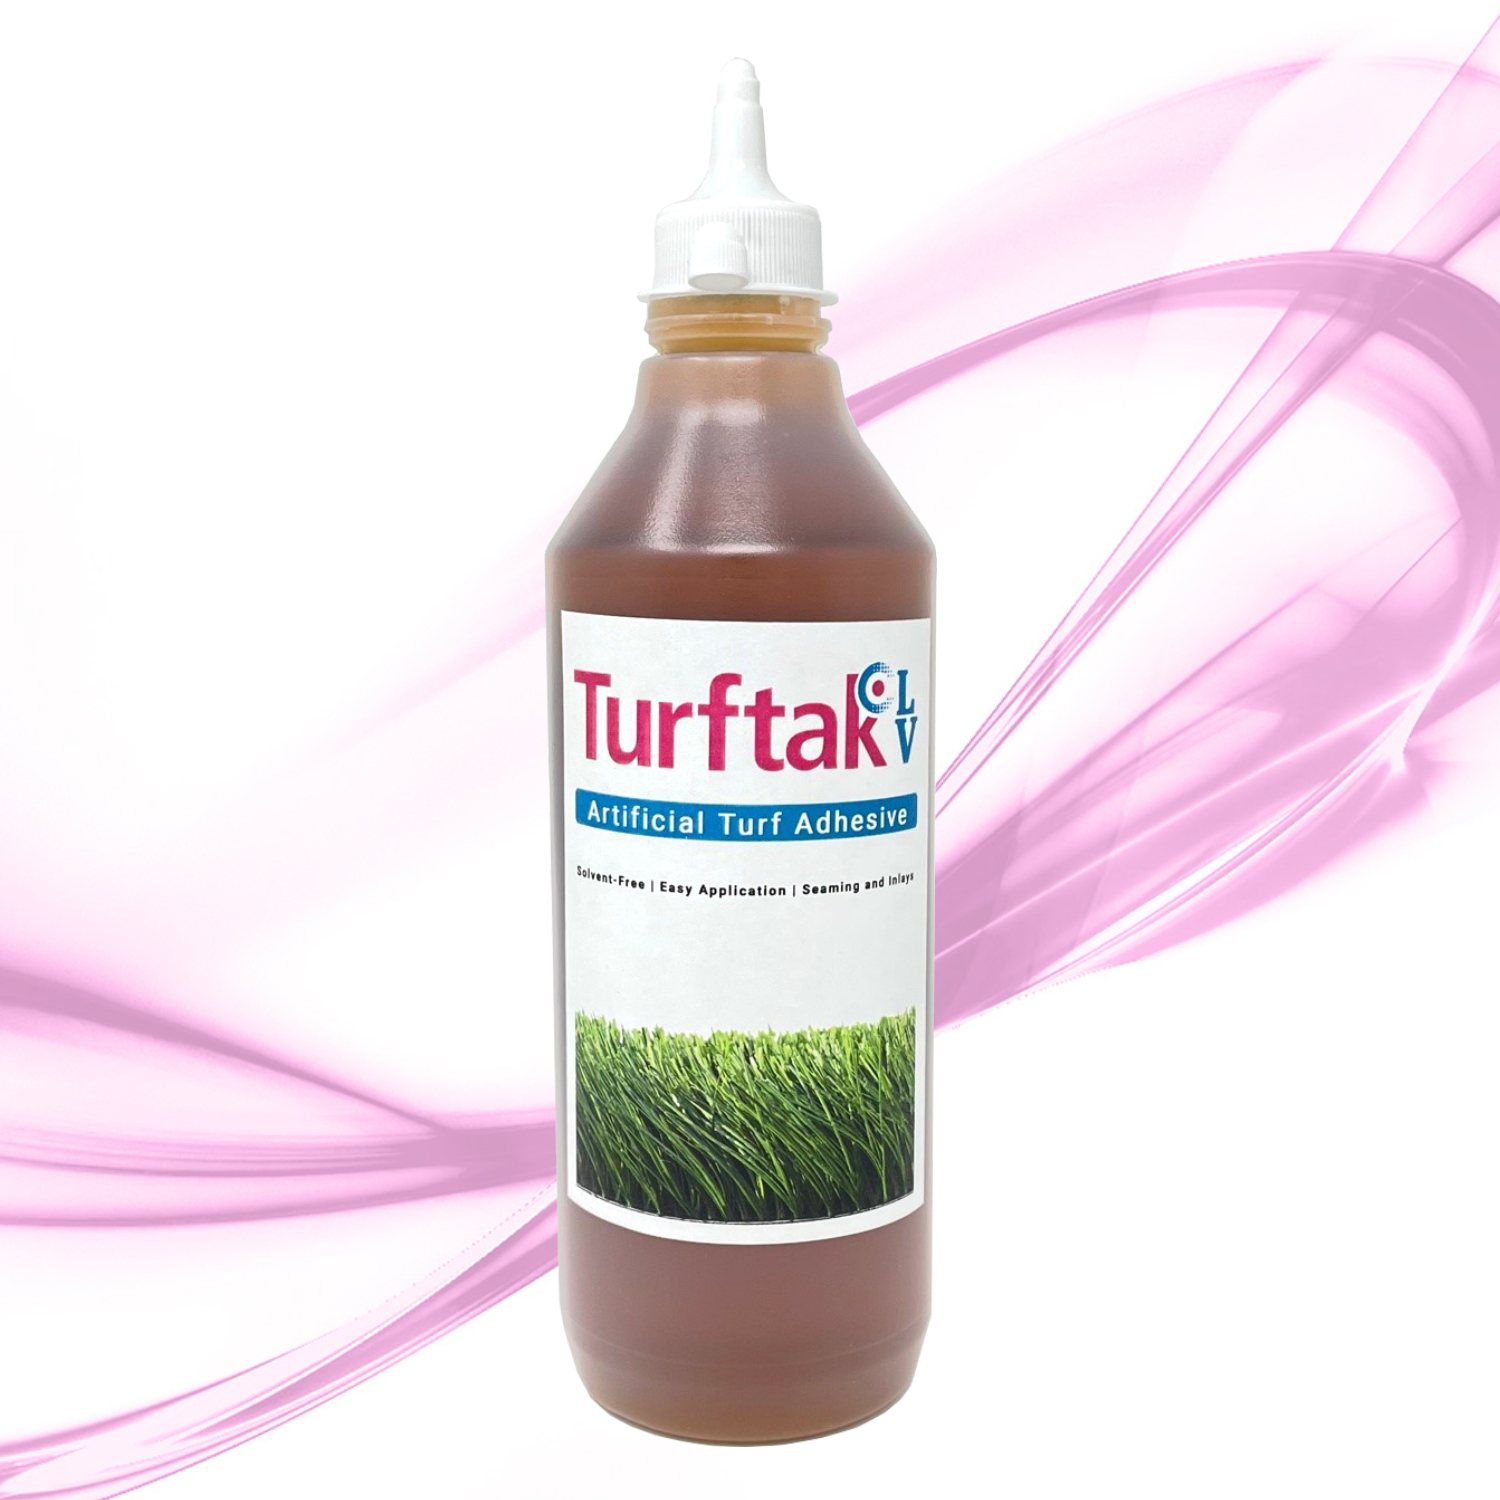 Turtak LV is great for touching up aging, worn, and damaged artificial turf lawns